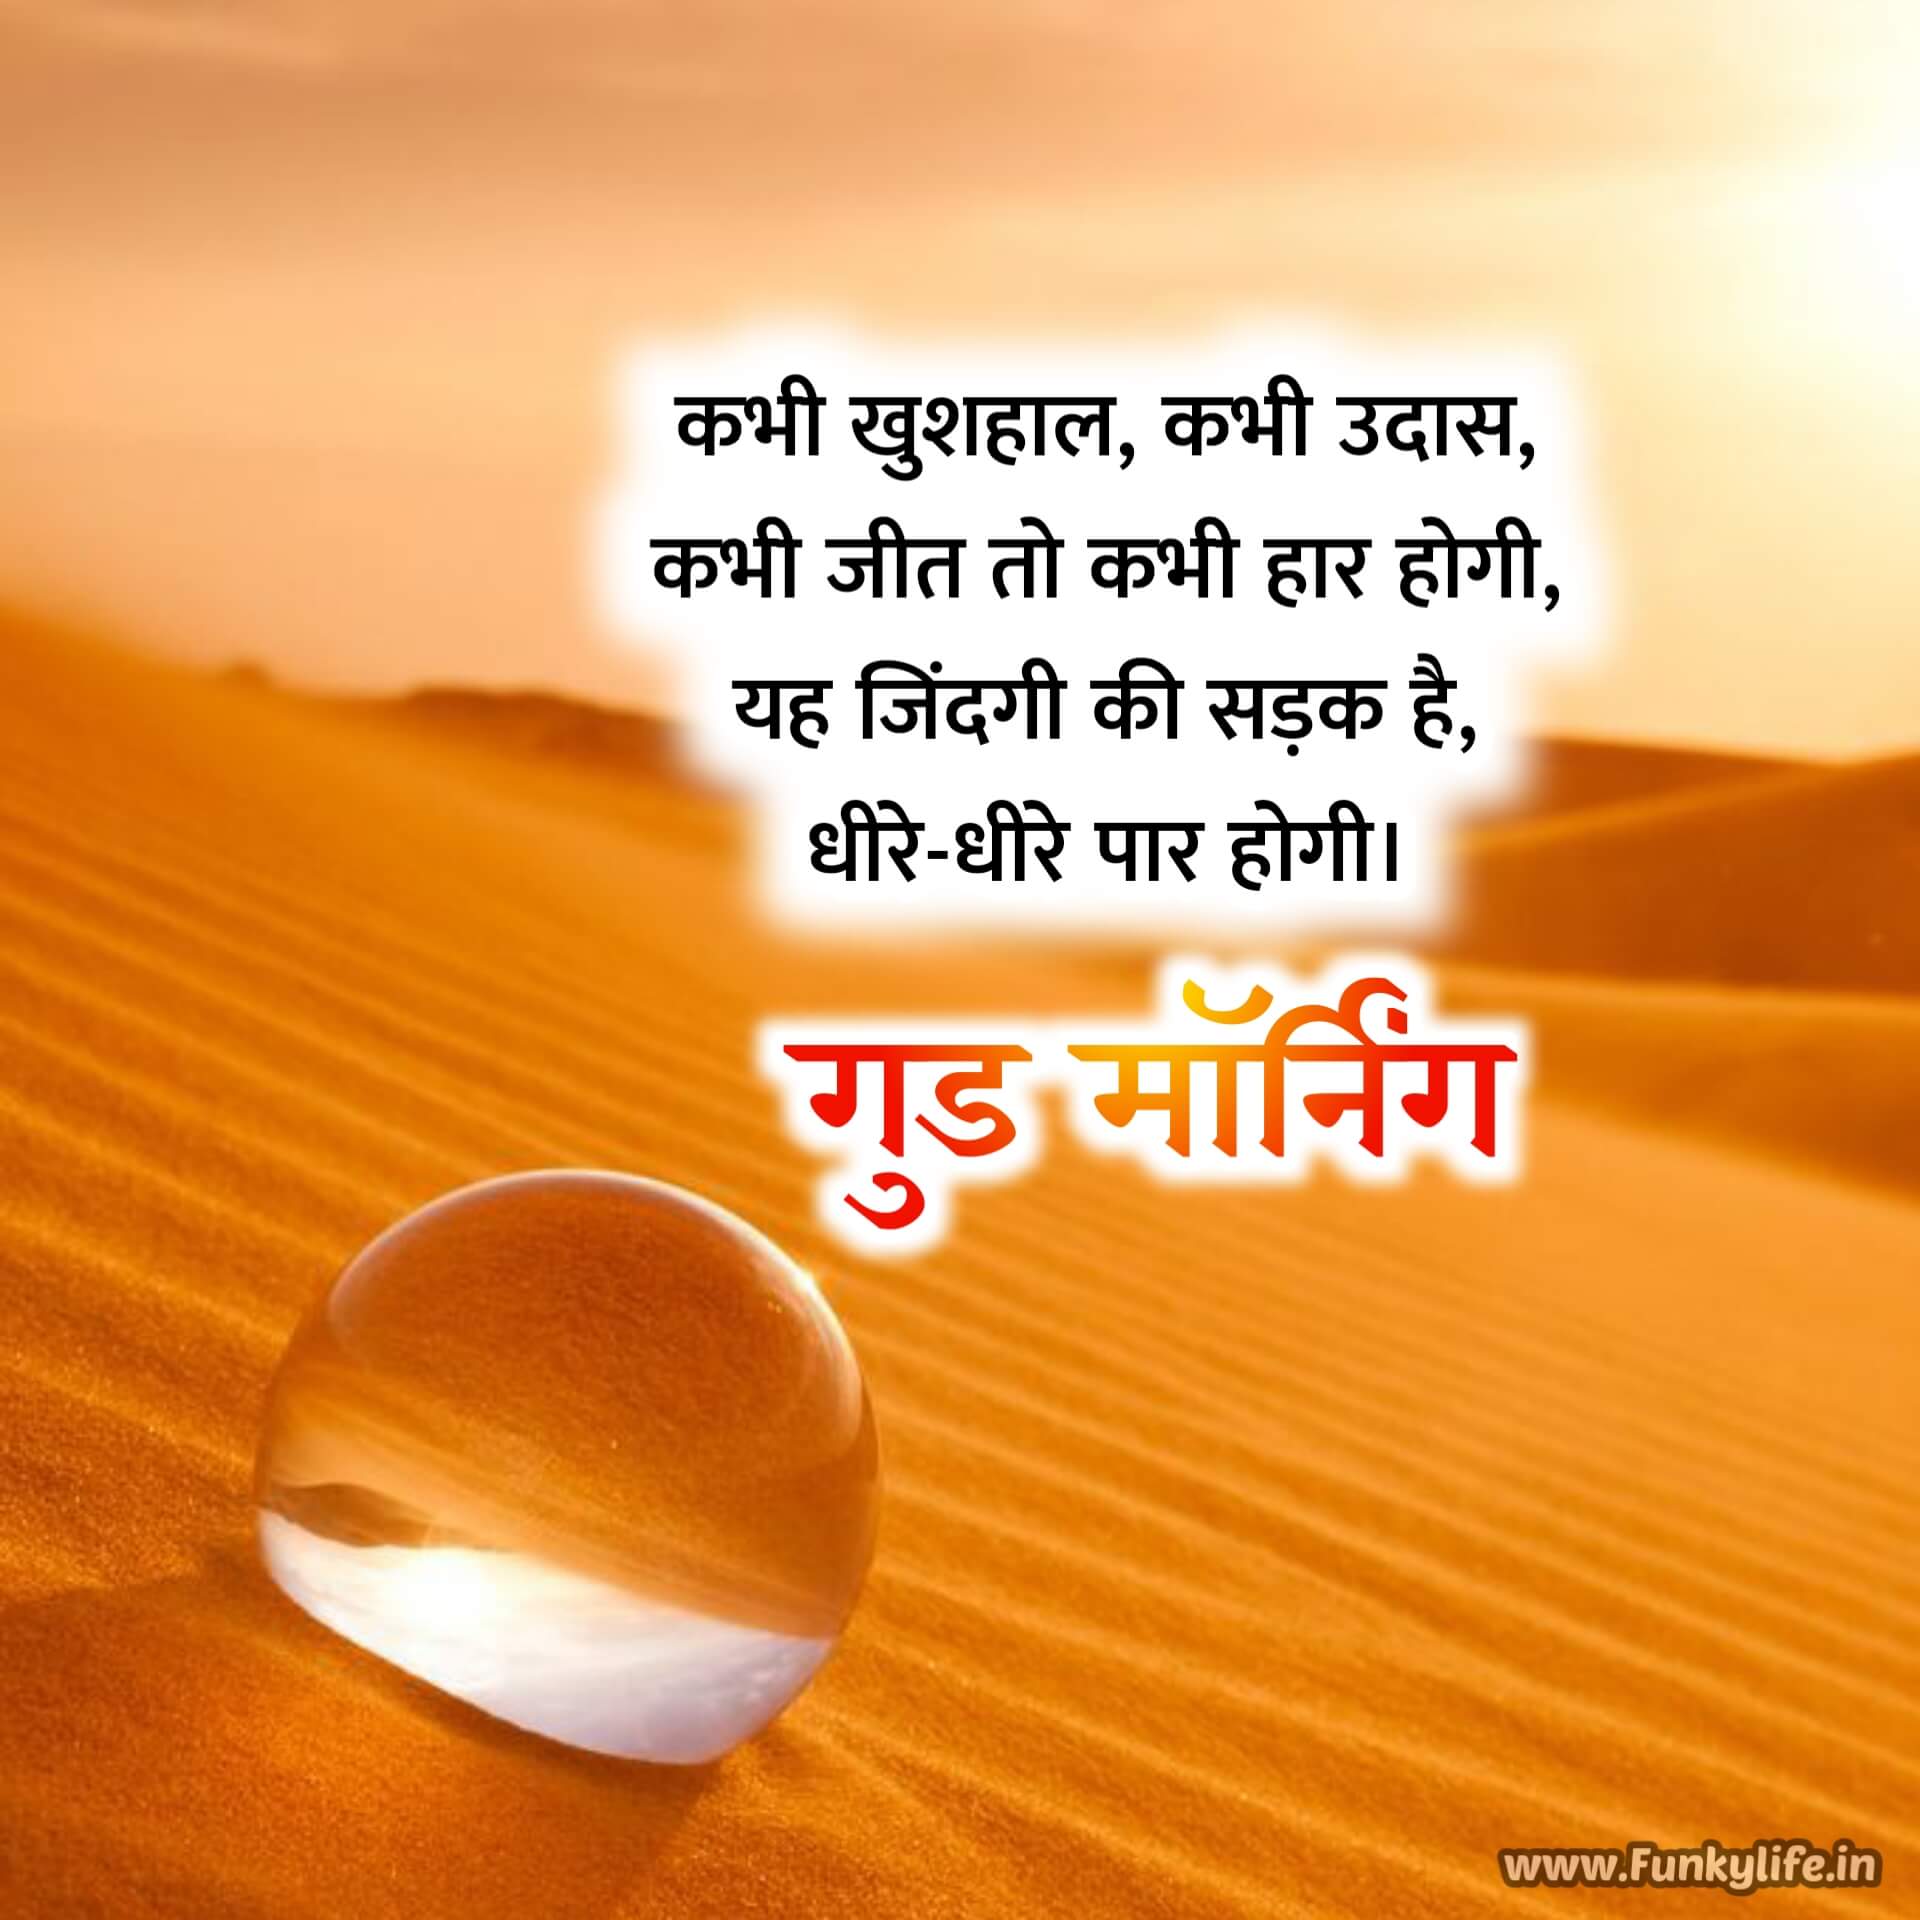 Good Morning Quotes in Hindi for Life